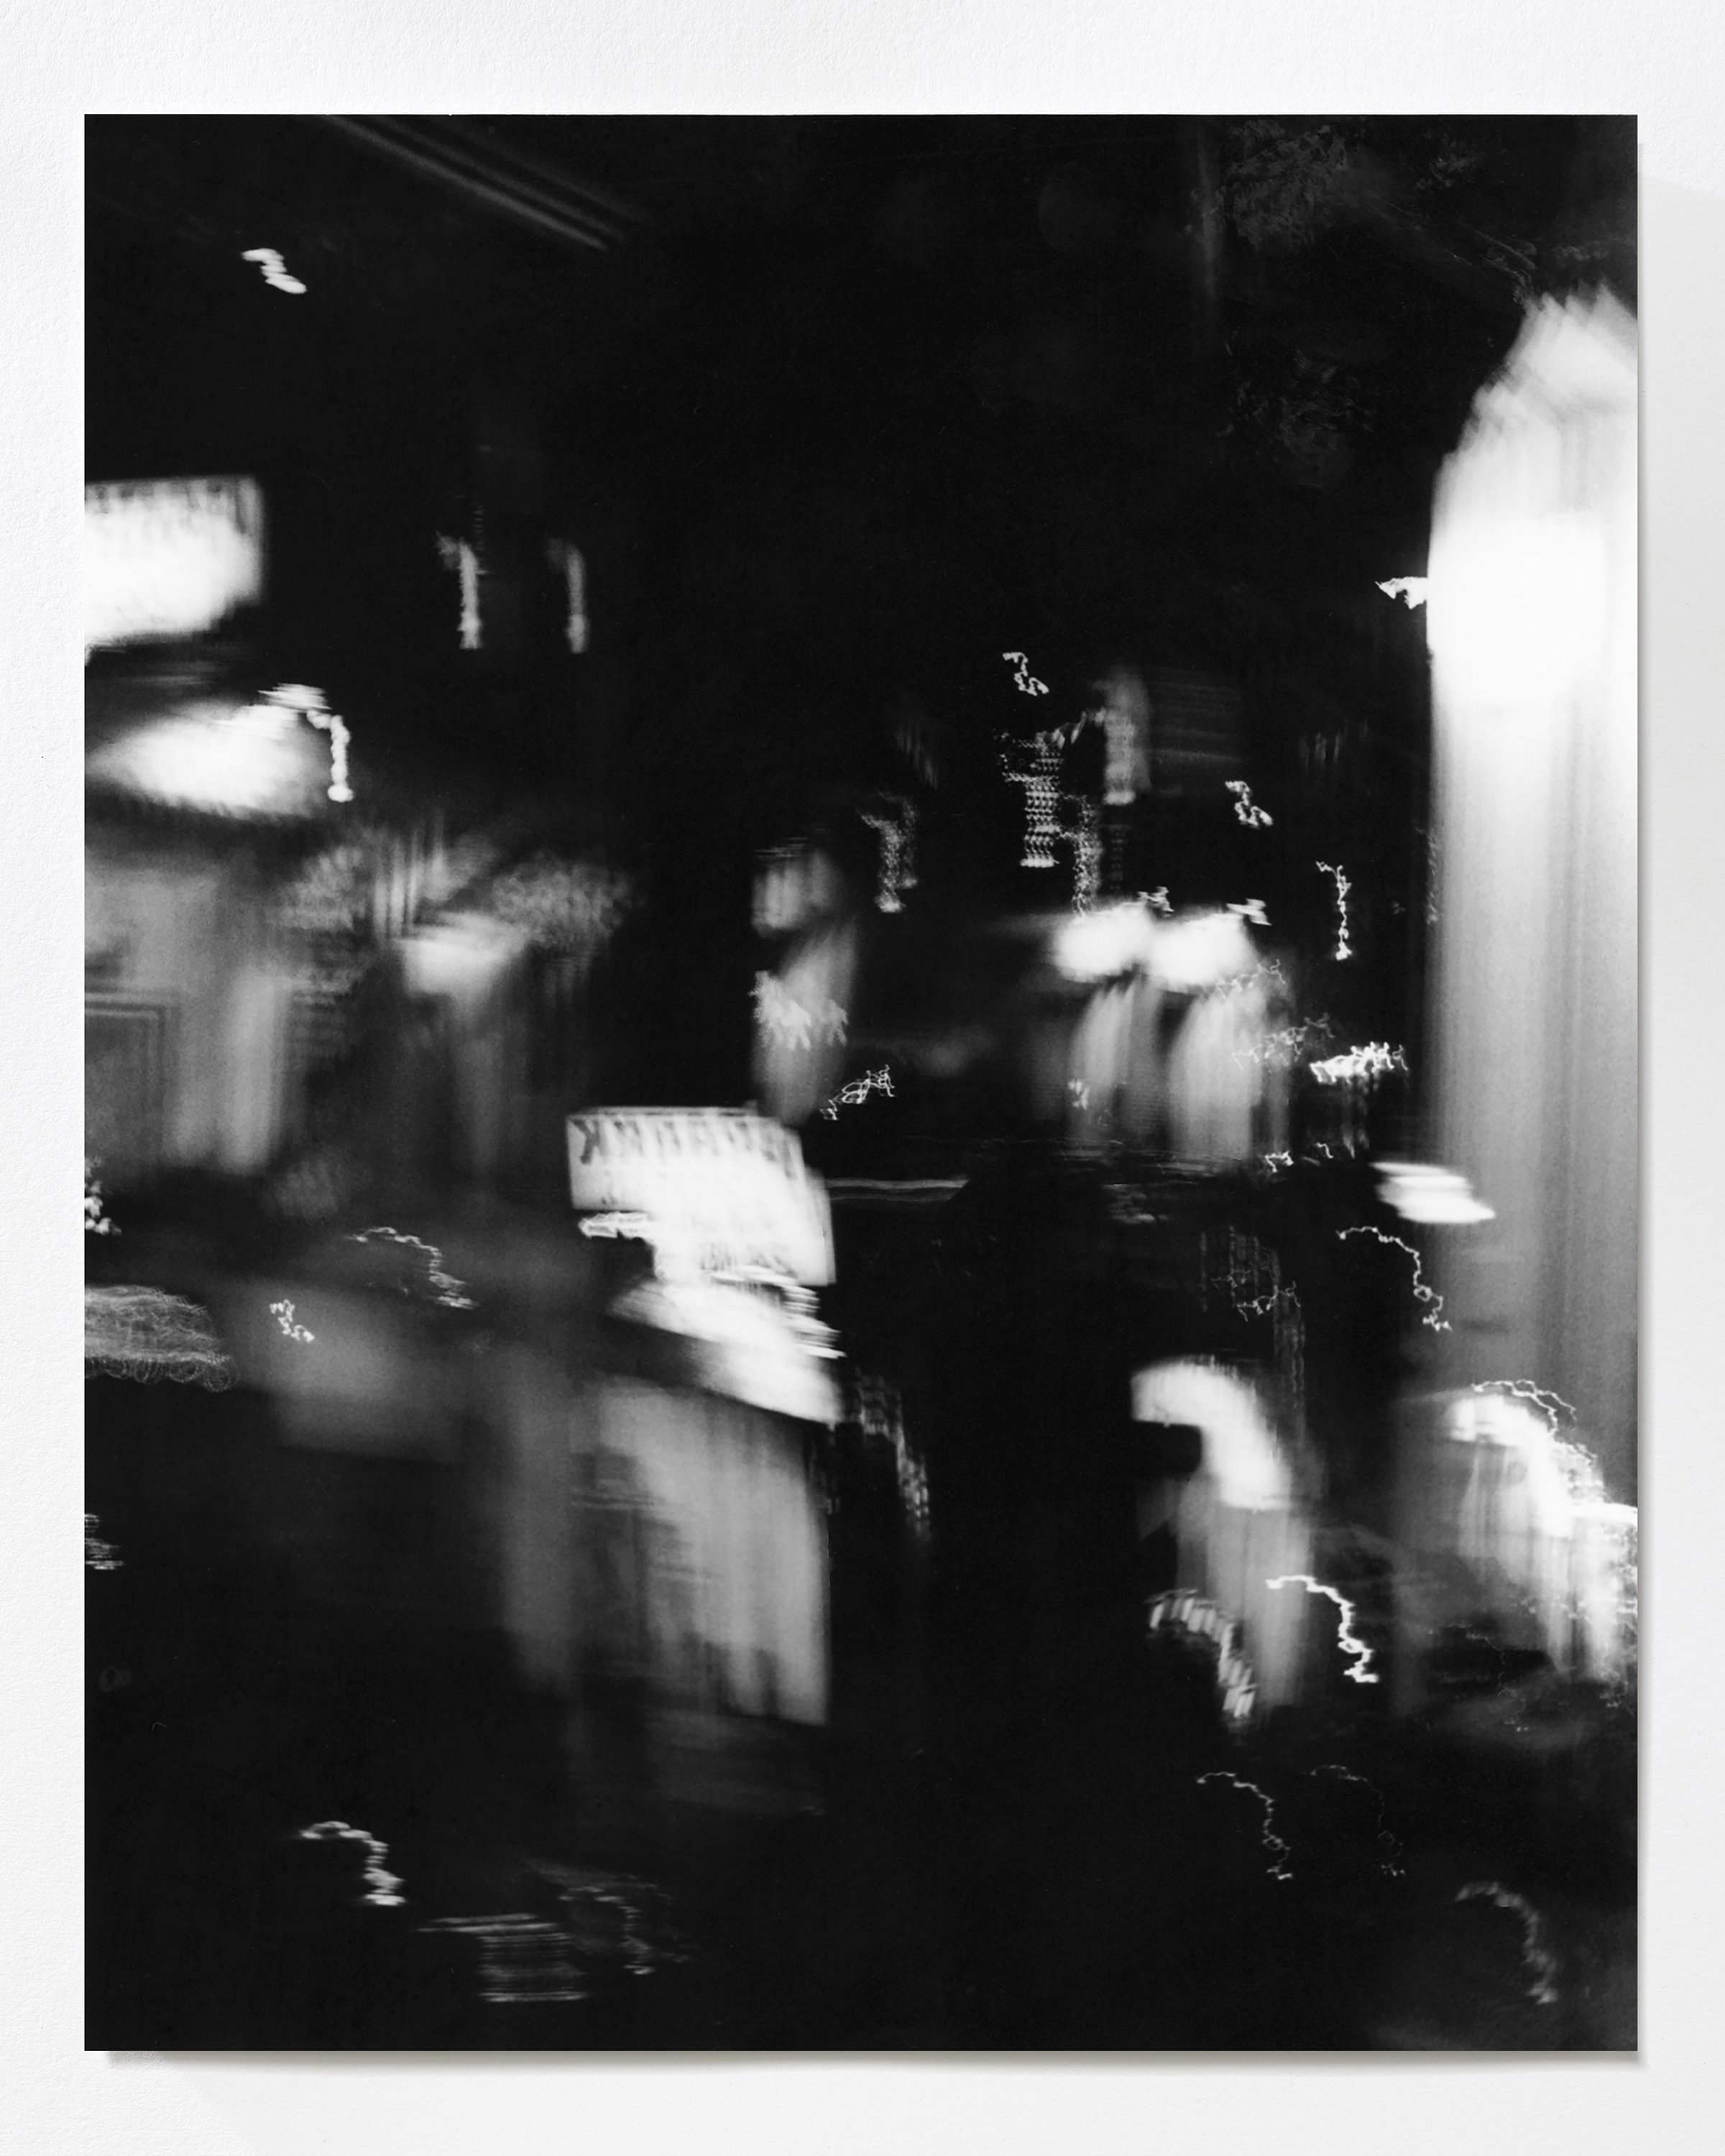 "37th Street, between Madison and Fifth, facing South, 10:57pm"